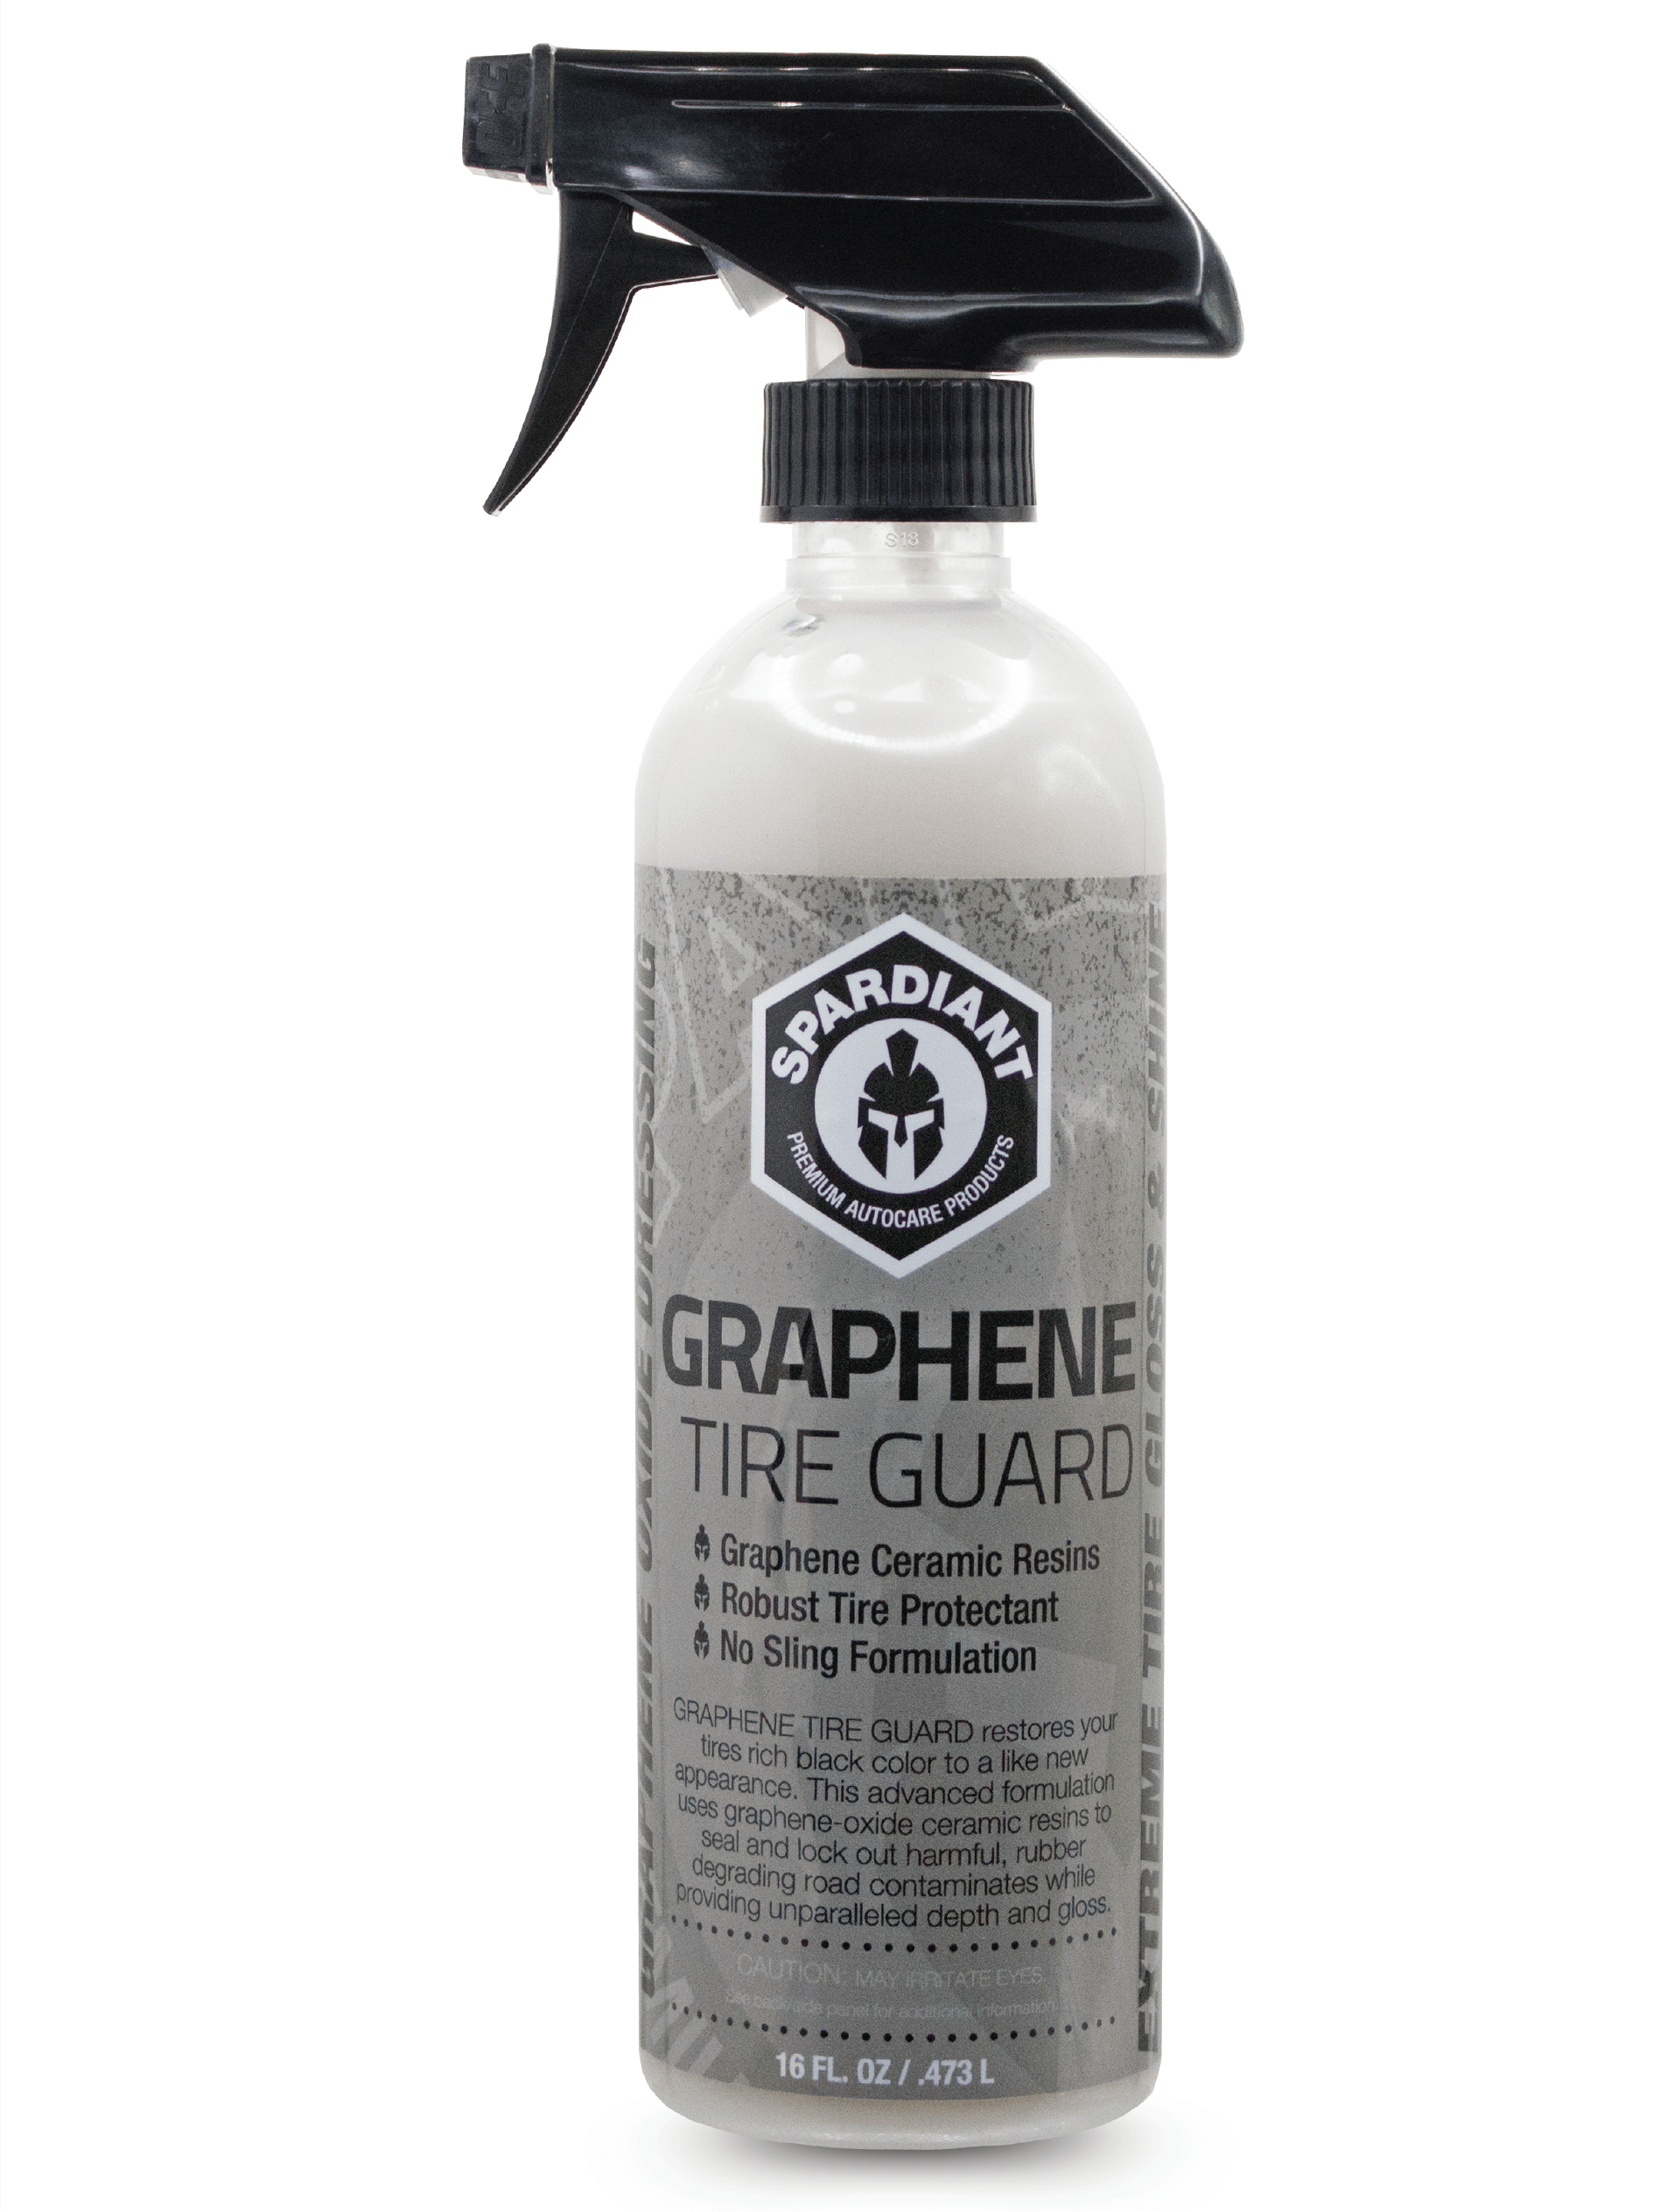 GRAPHENE Tire Guard - SPARDIANT Graphene Tire Protectant